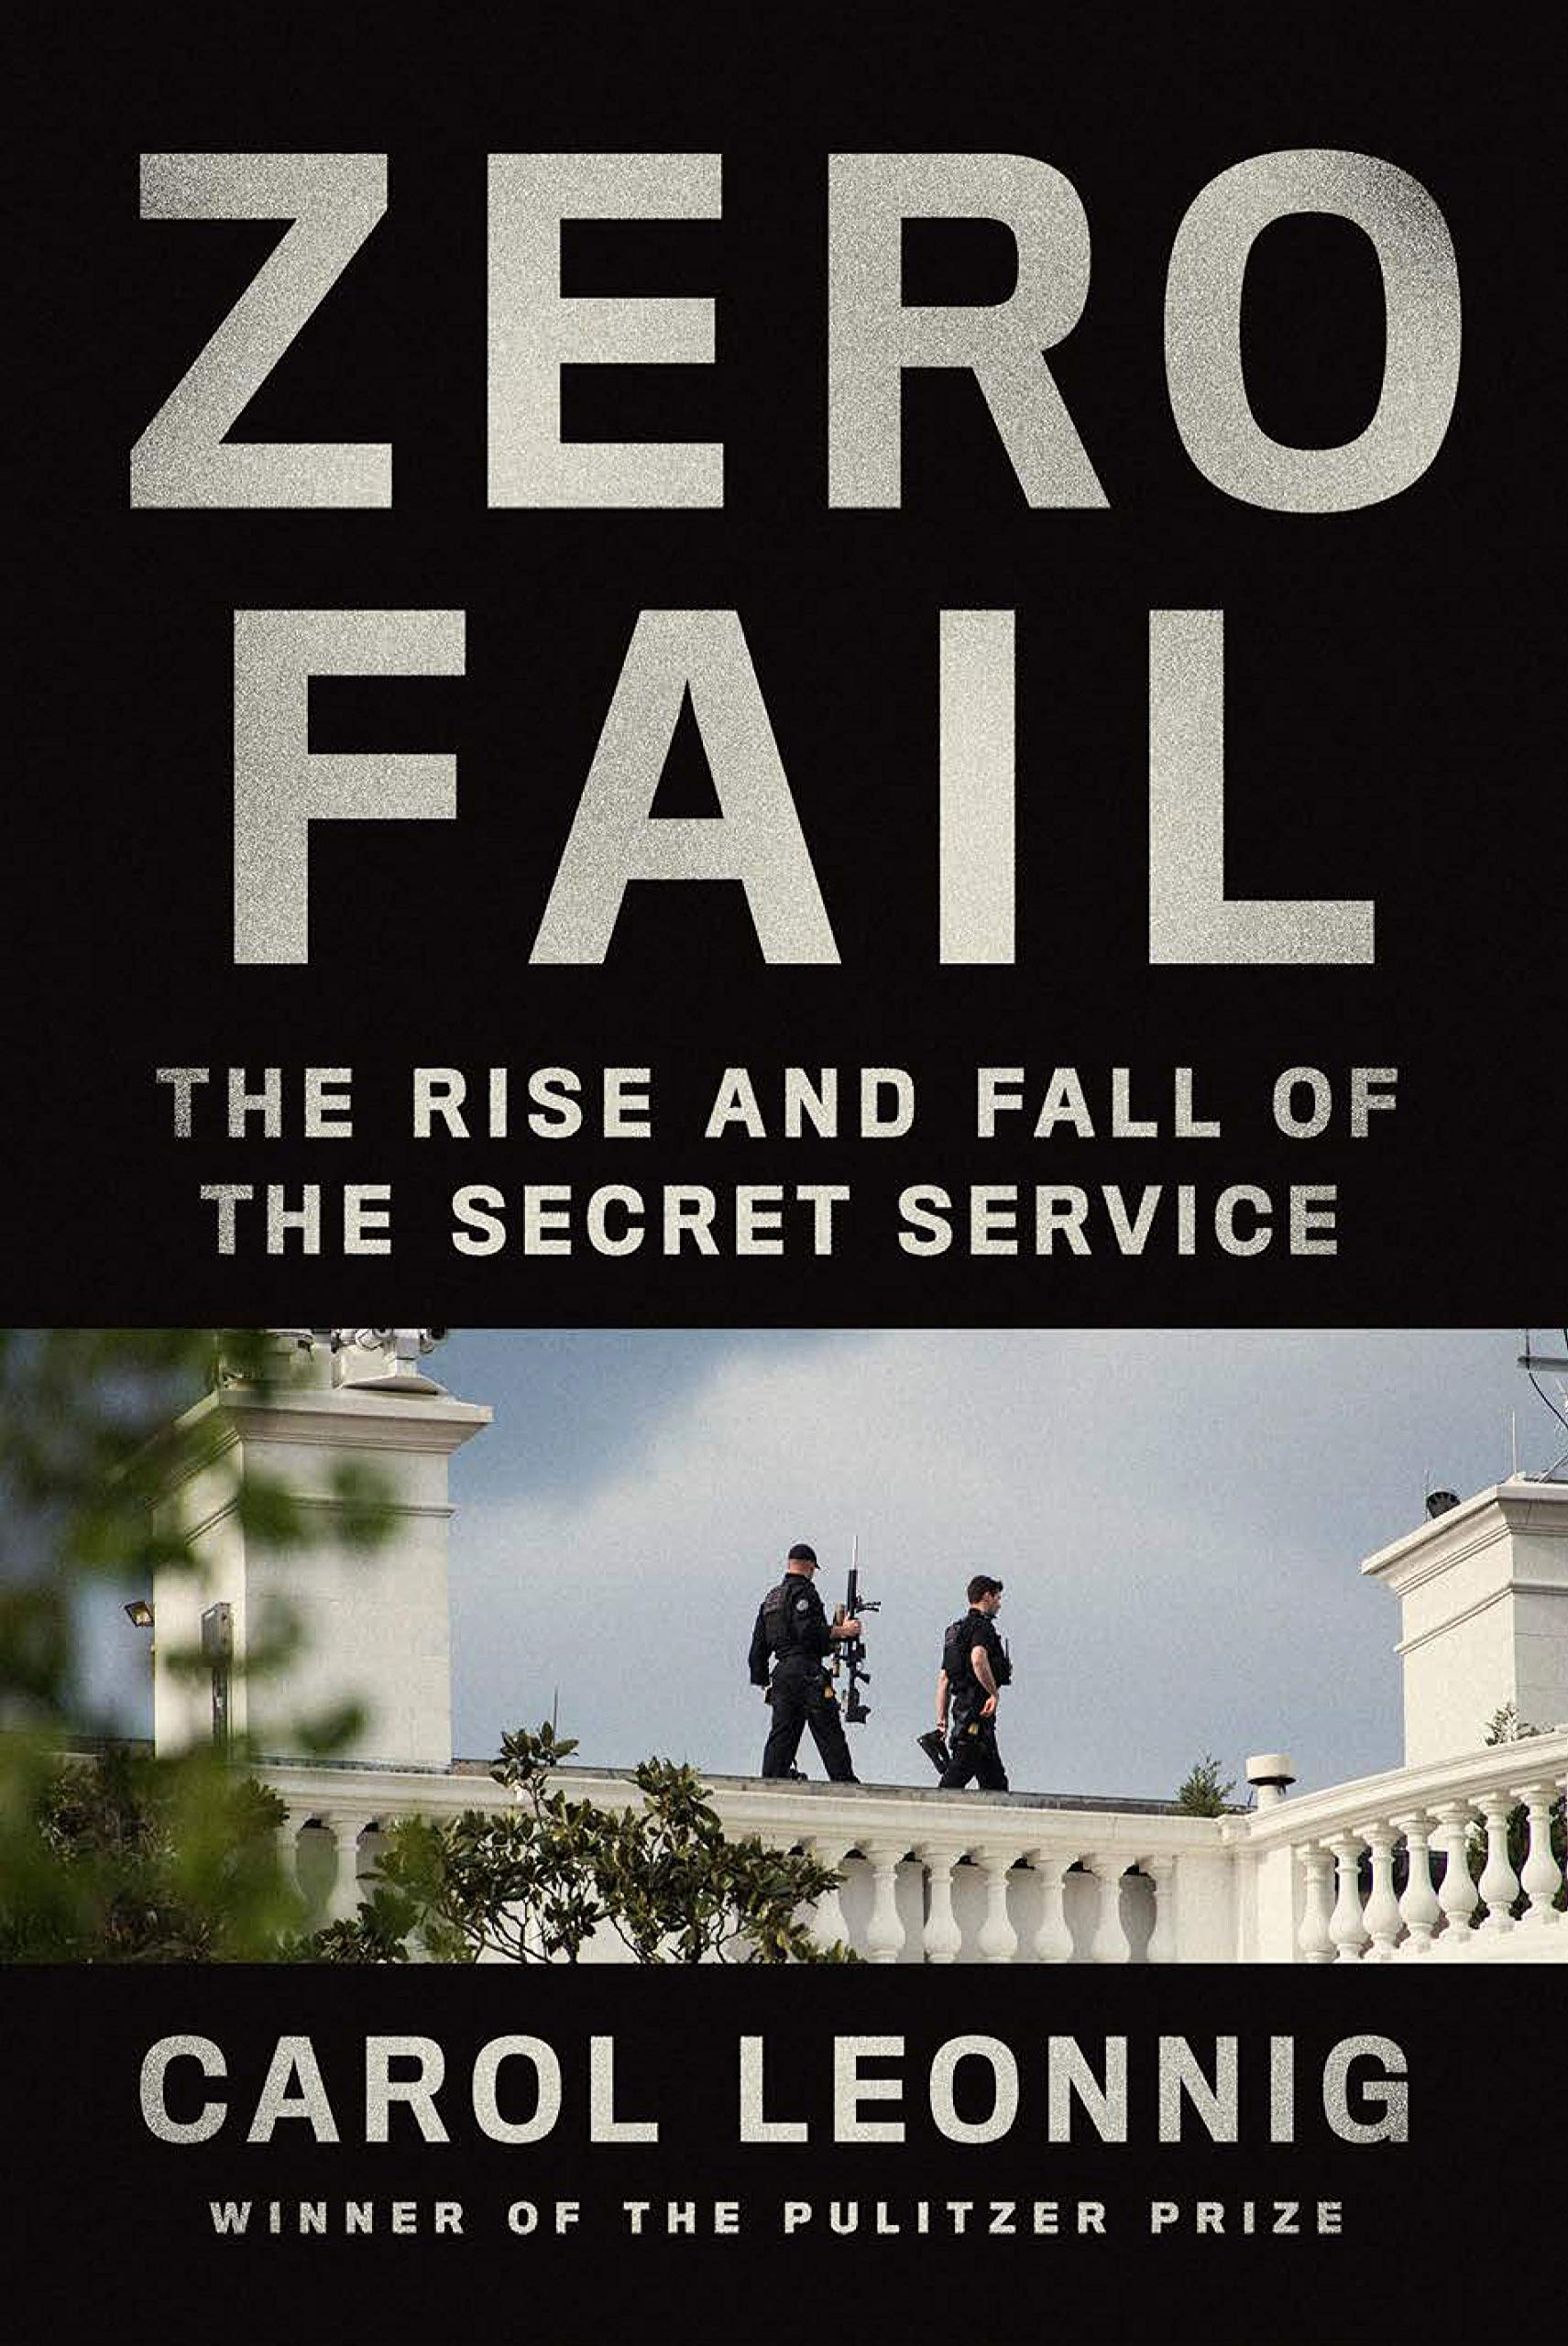 Image of the Book Cover for Zero Fail featuring an image of 2 security guards with automatic riffles on top of a prominent government building. 